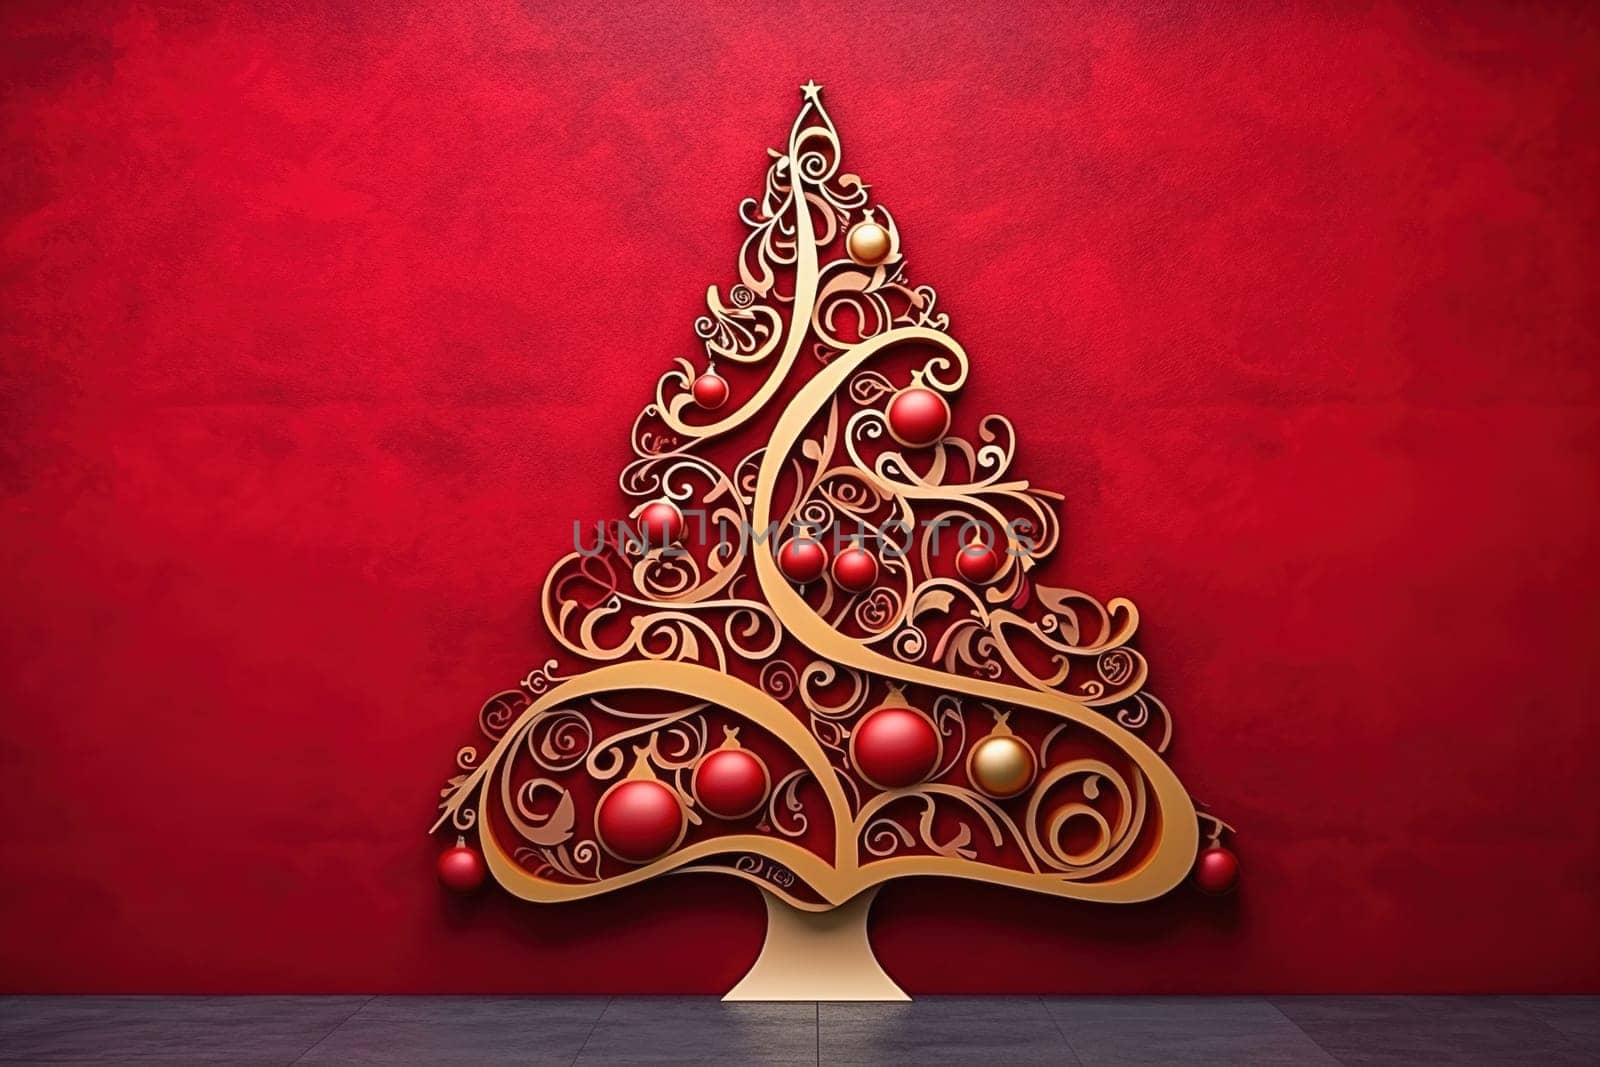 Illustration of 3d Christmas tree on red background. by Yurich32